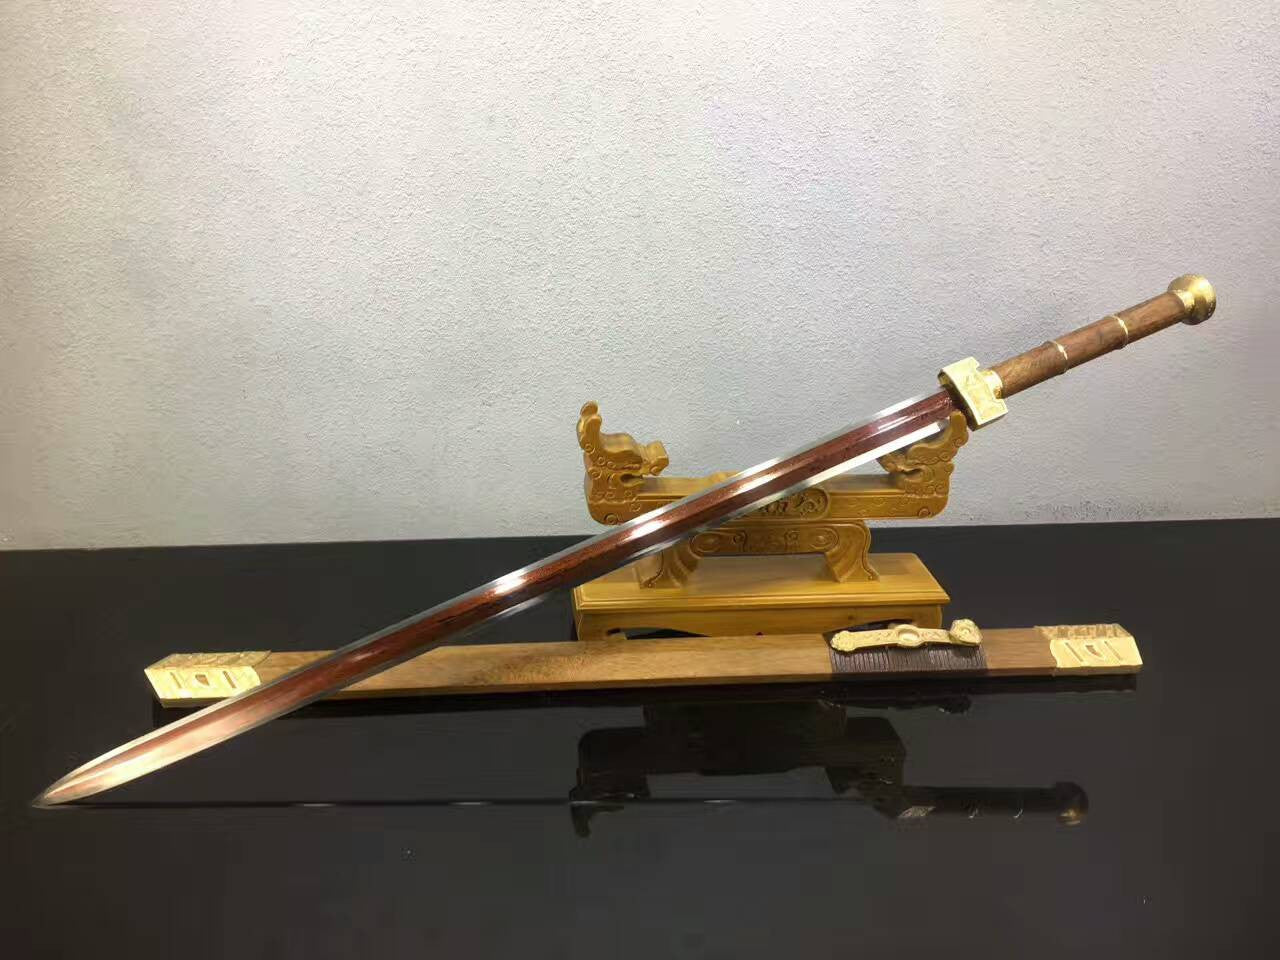 Ruyi jian,Folded steel red blade,Copper fittings,Rosewood scabbard - Chinese sword shop